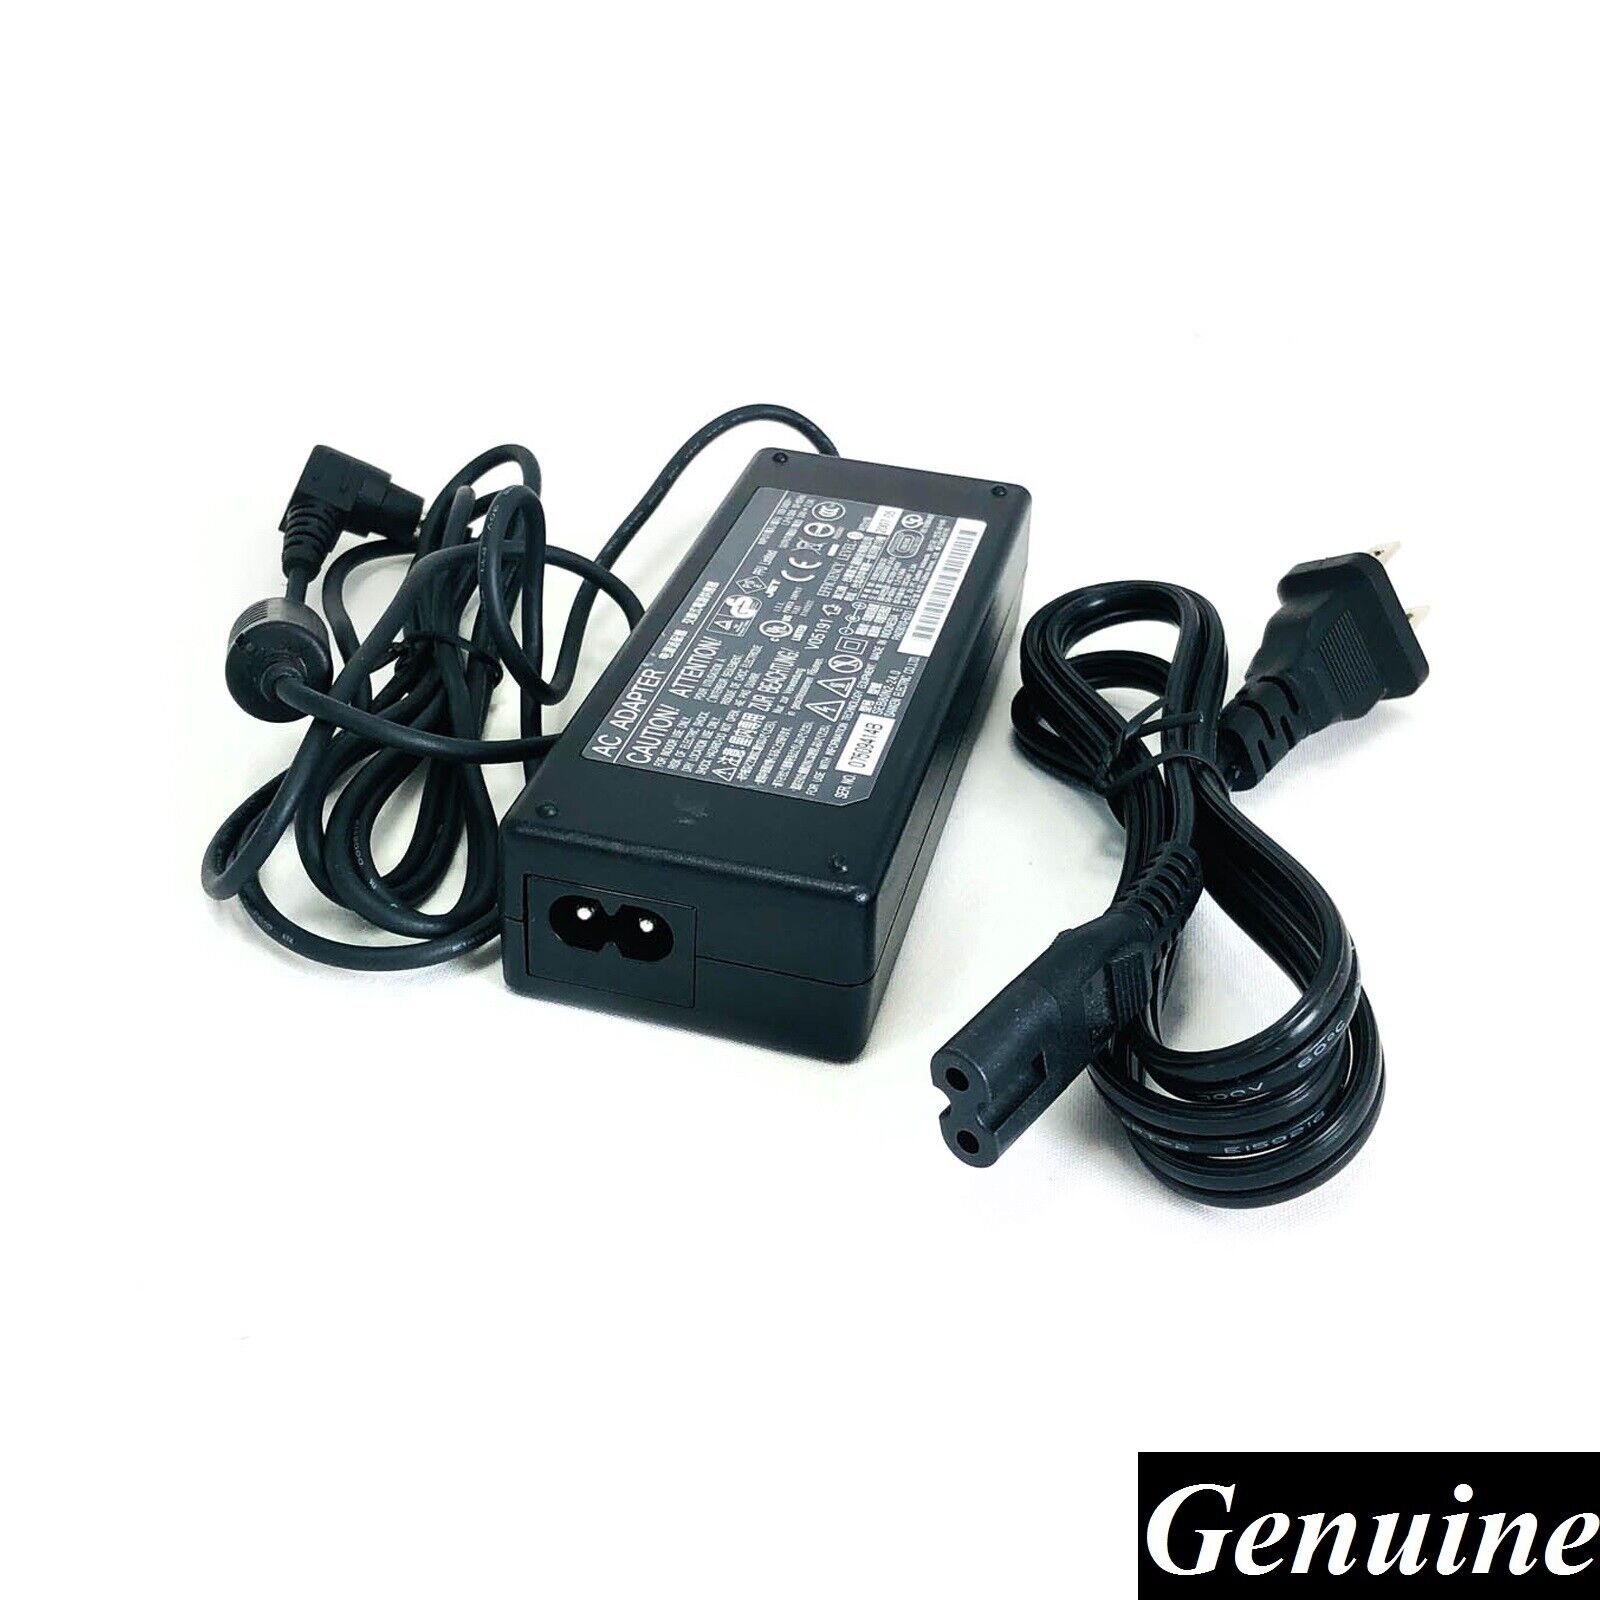 Genuine AC Charger Adapter for Fujitsu ScanSnap S1500 S1500M Scanner w/Cord